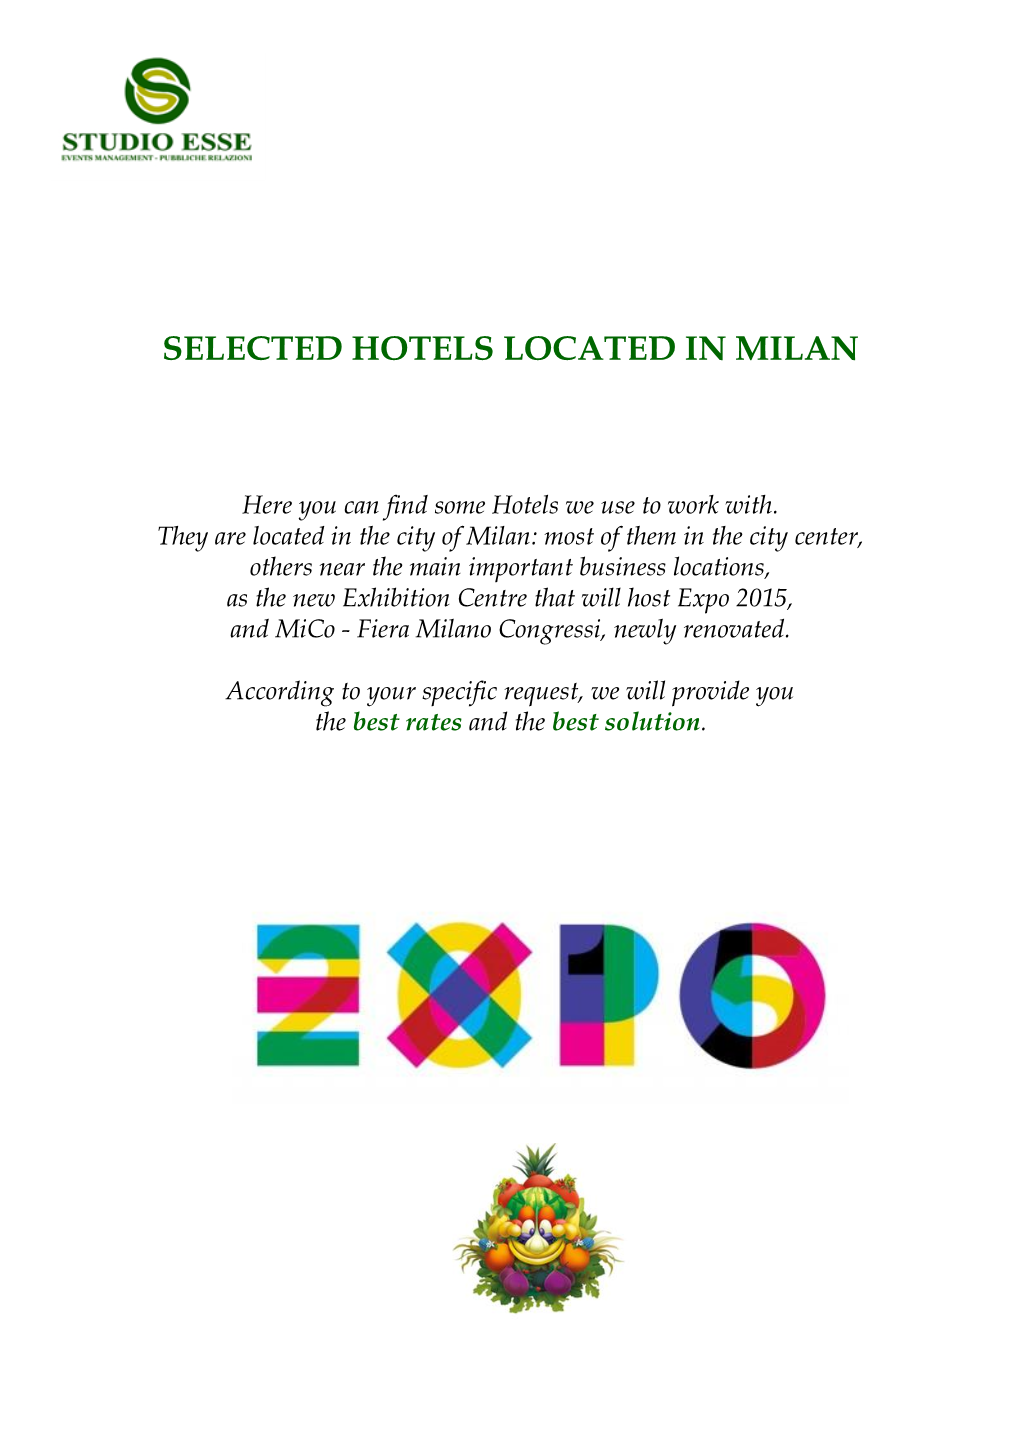 Selected Hotels Located in Milan